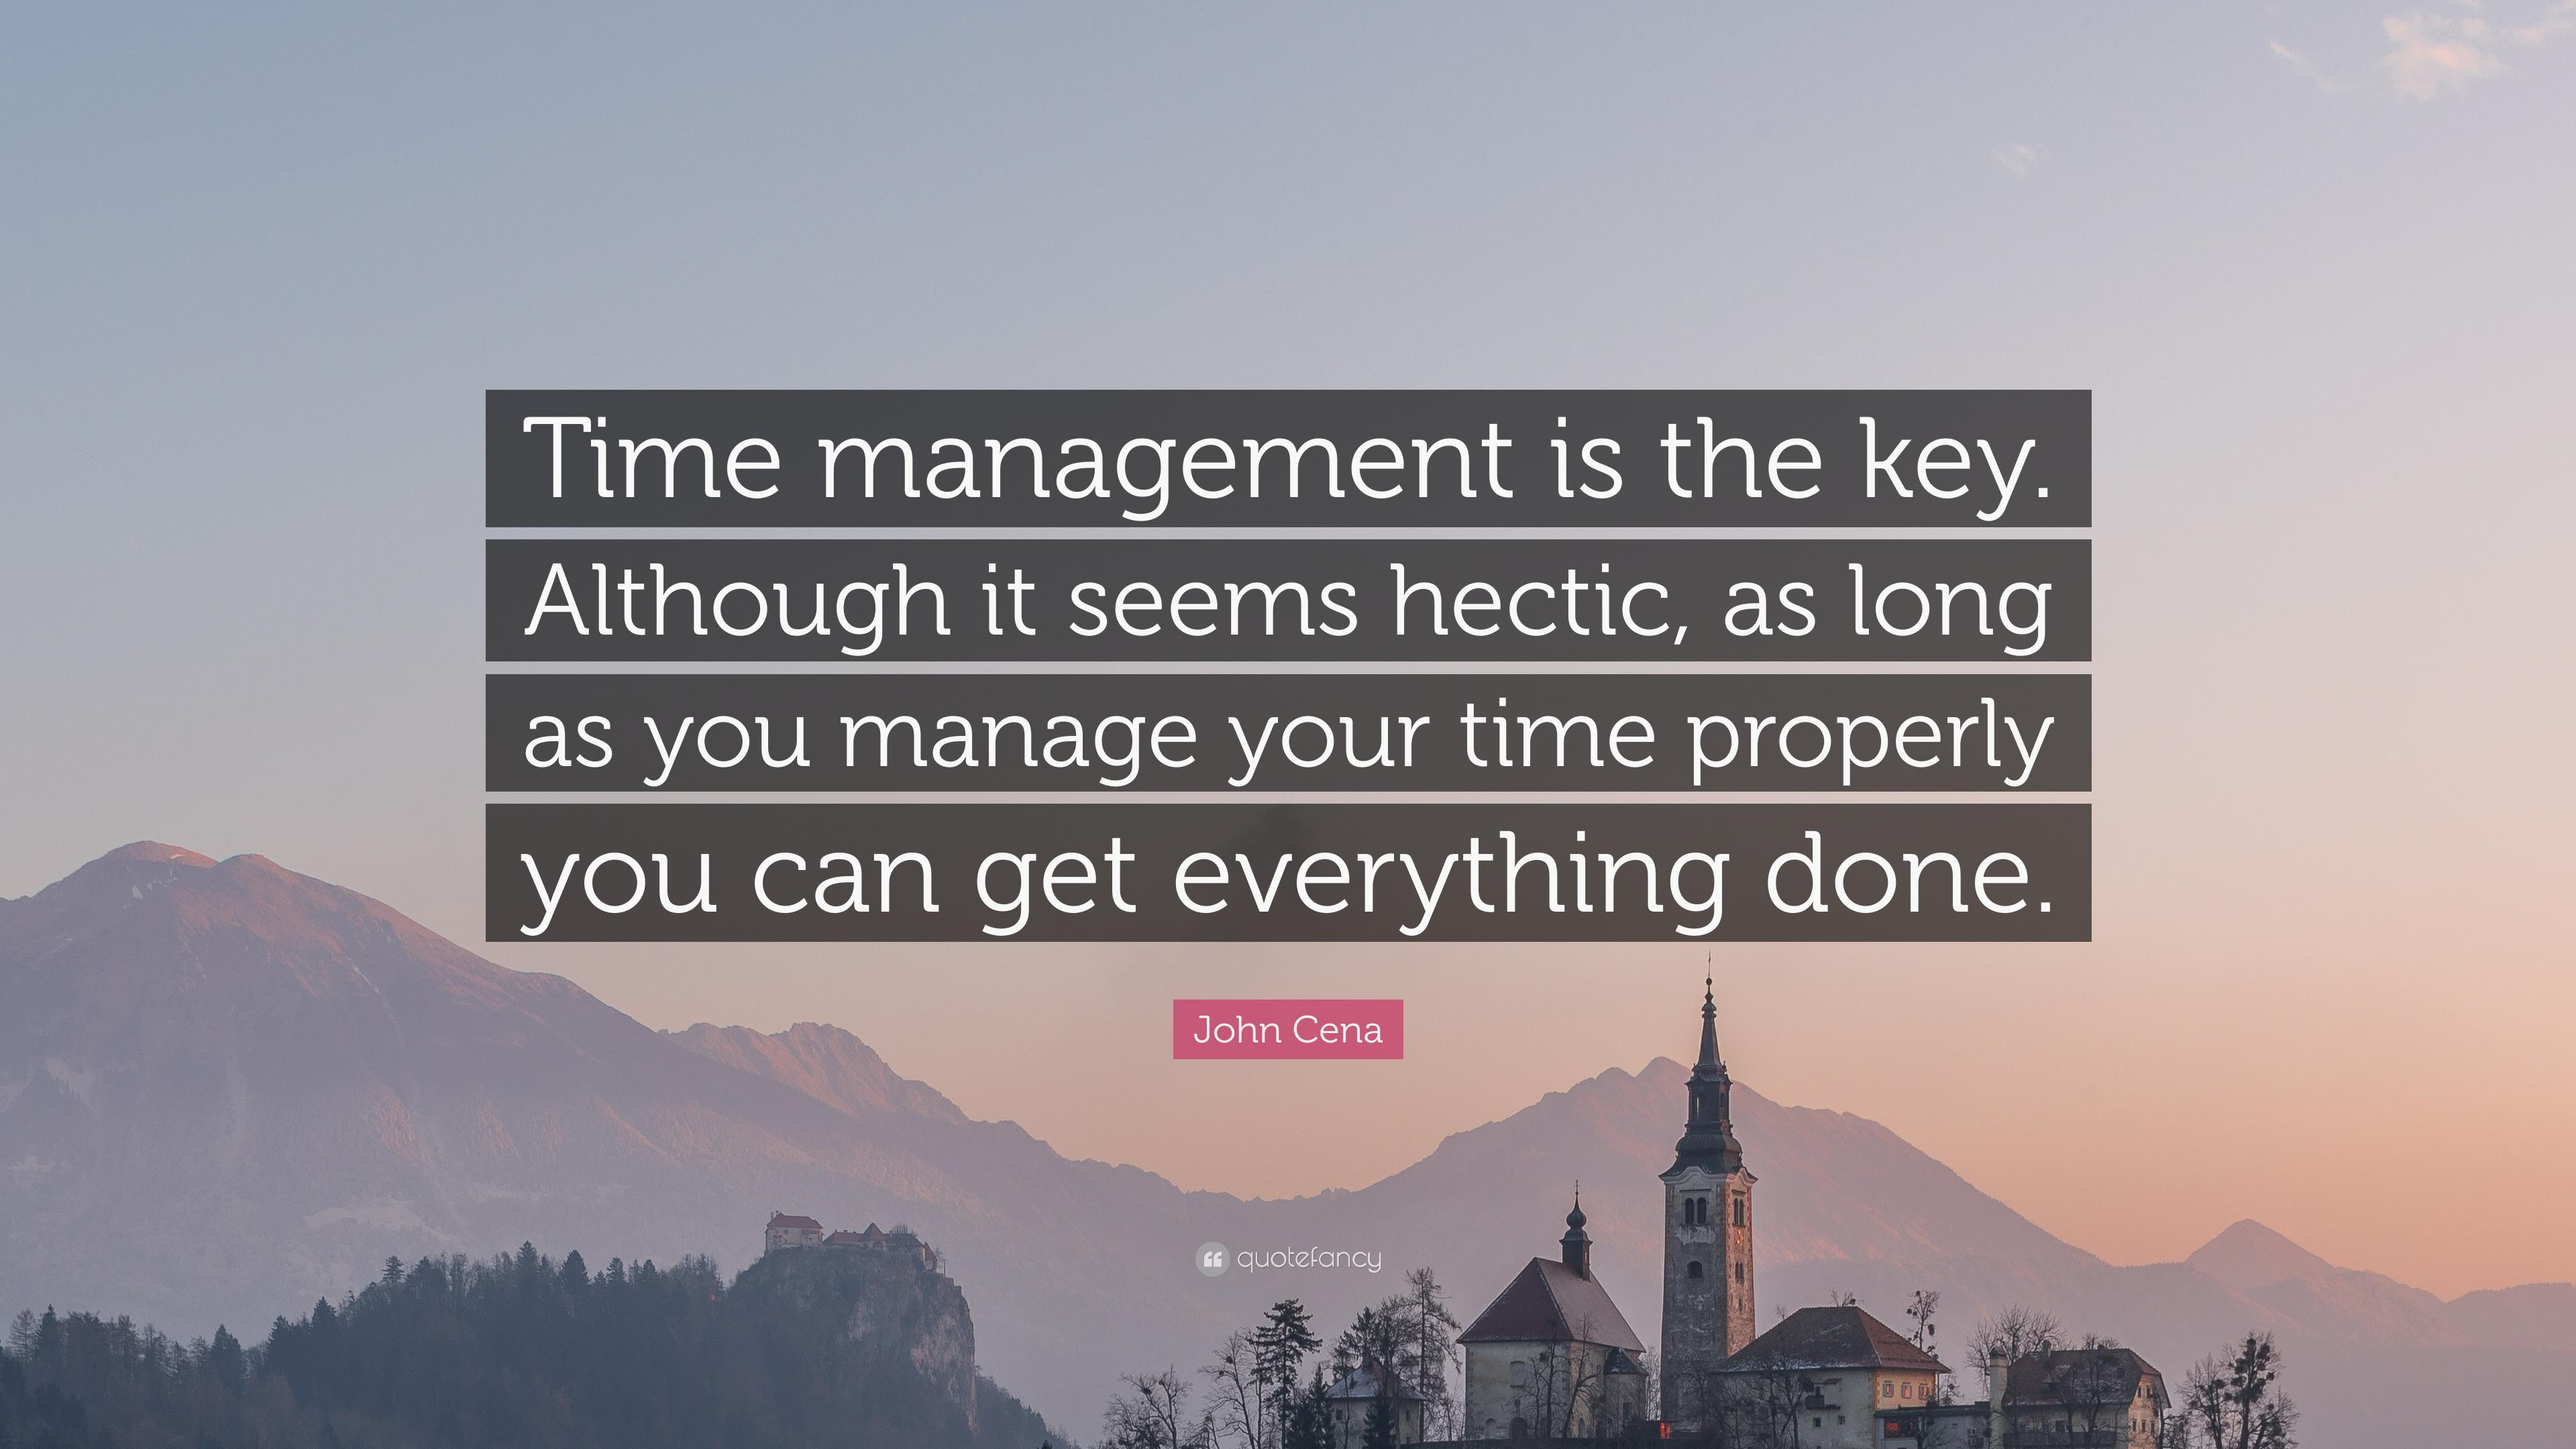 John Cena Quote: “Time management is the key. Although it seems